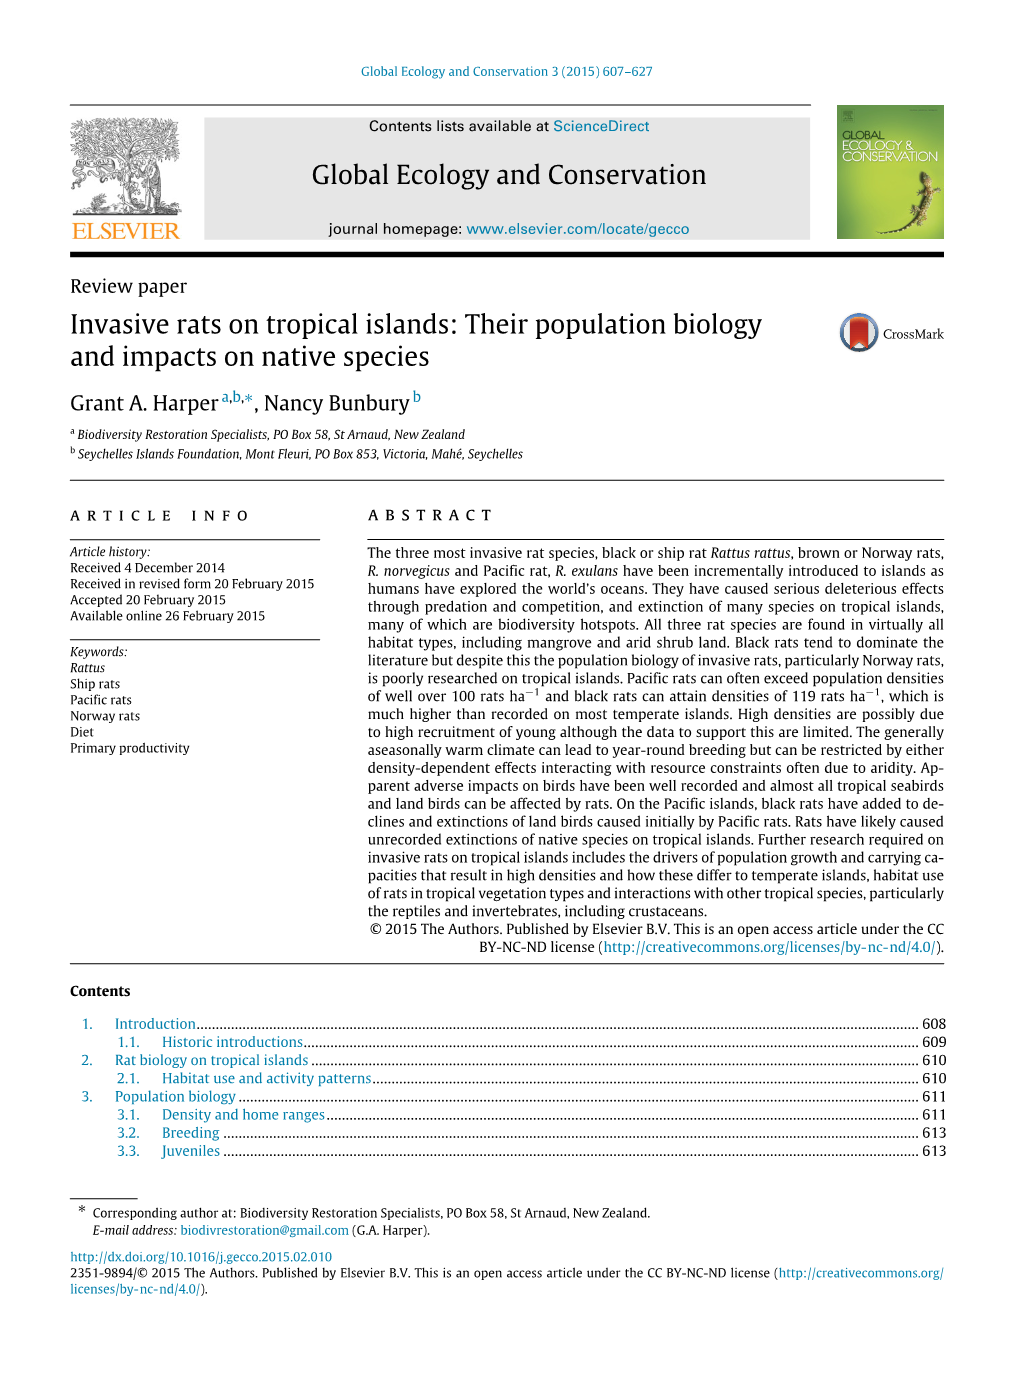 Invasive Rats on Tropical Islands: Their Population Biology and Impacts on Native Species